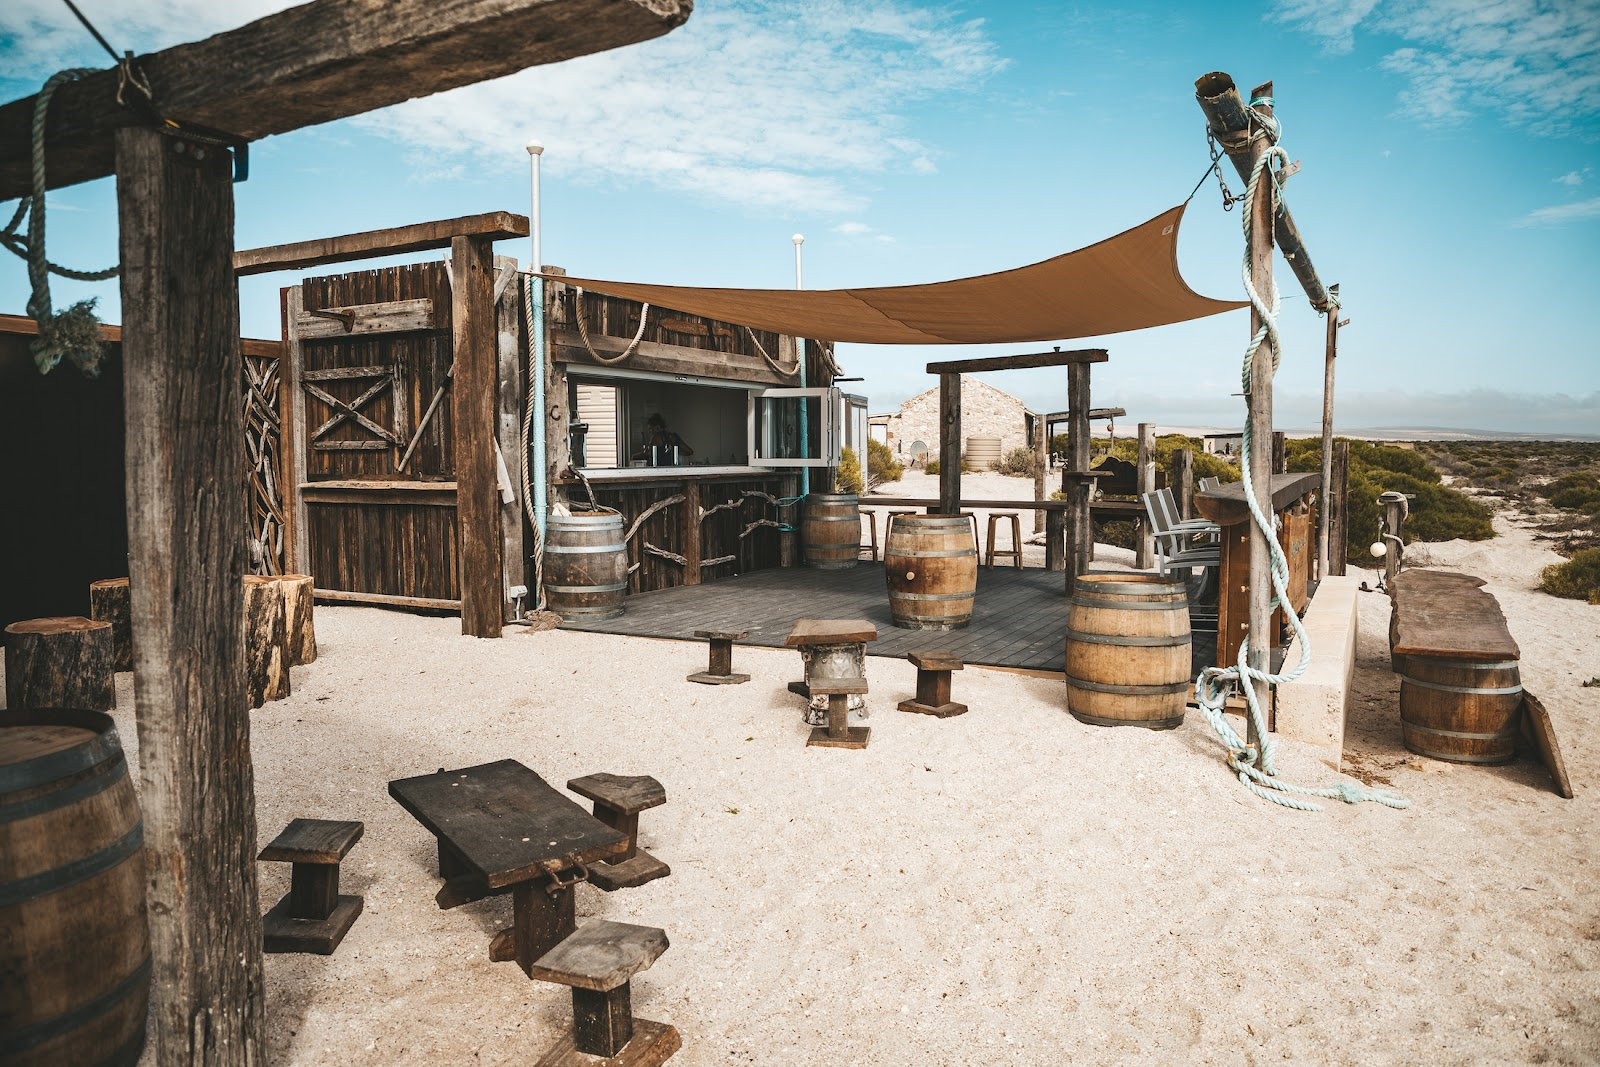 Rustic beachside bar setup with wooden structures and barrels.